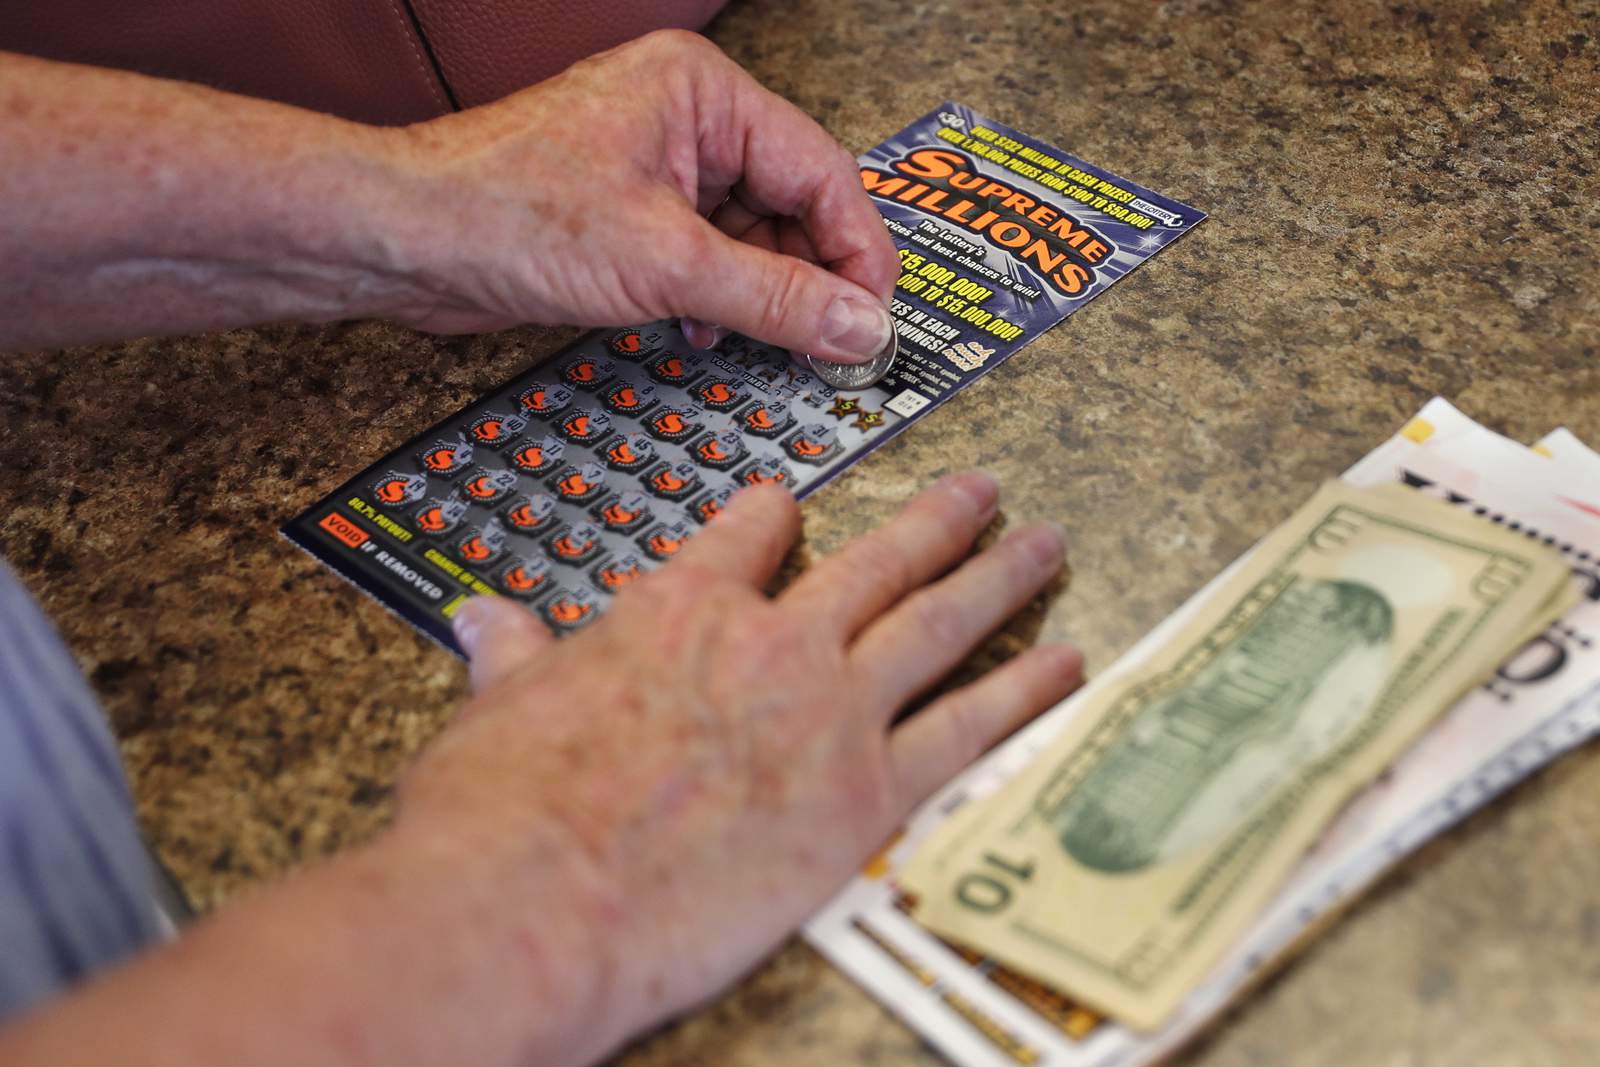 Man wins $2M lottery after clerk gives him wrong ticket